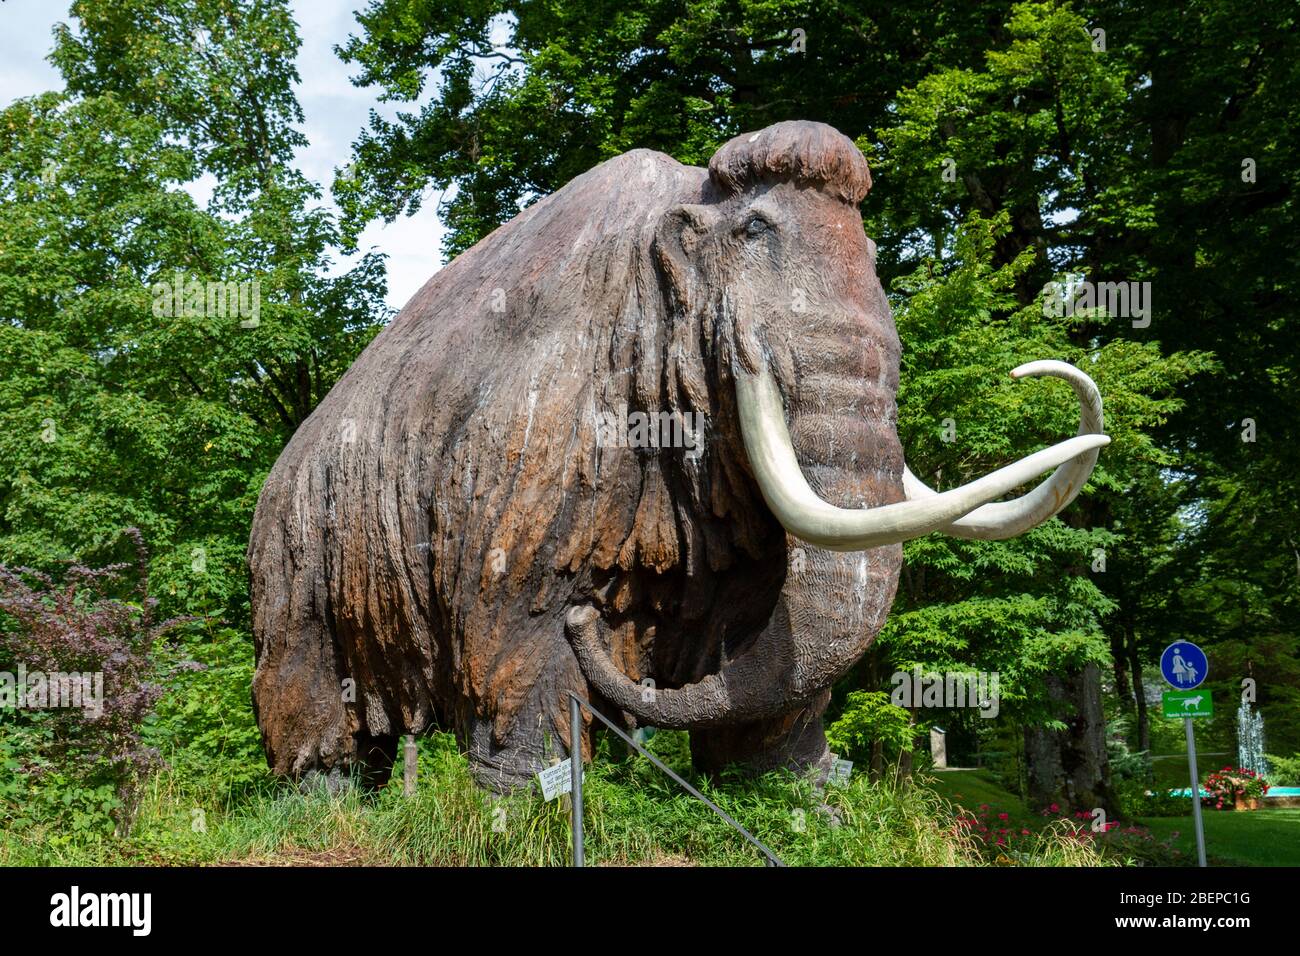 A full sized model of a mammoth outside Siegsdorf Natural History and Mammoth Museum in Siegsdorf, Bavaria, Germany. Stock Photo